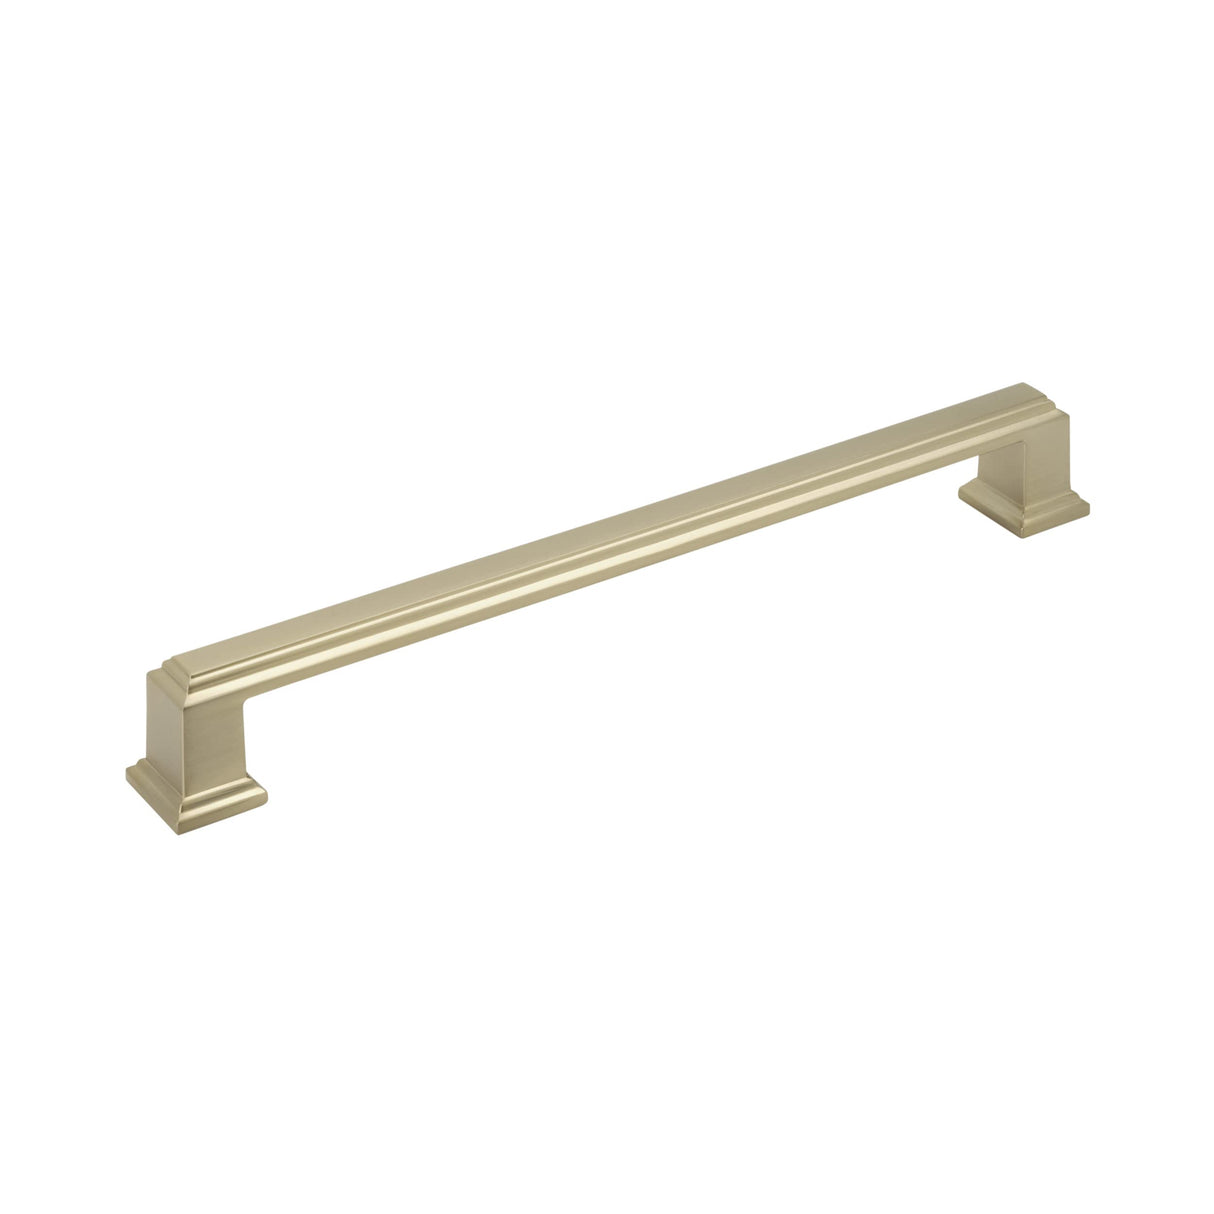 Amerock Cabinet Pull Golden Champagne 7-9/16 inch (192 mm) Center to Center Appoint 1 Pack Drawer Pull Drawer Handle Cabinet Hardware